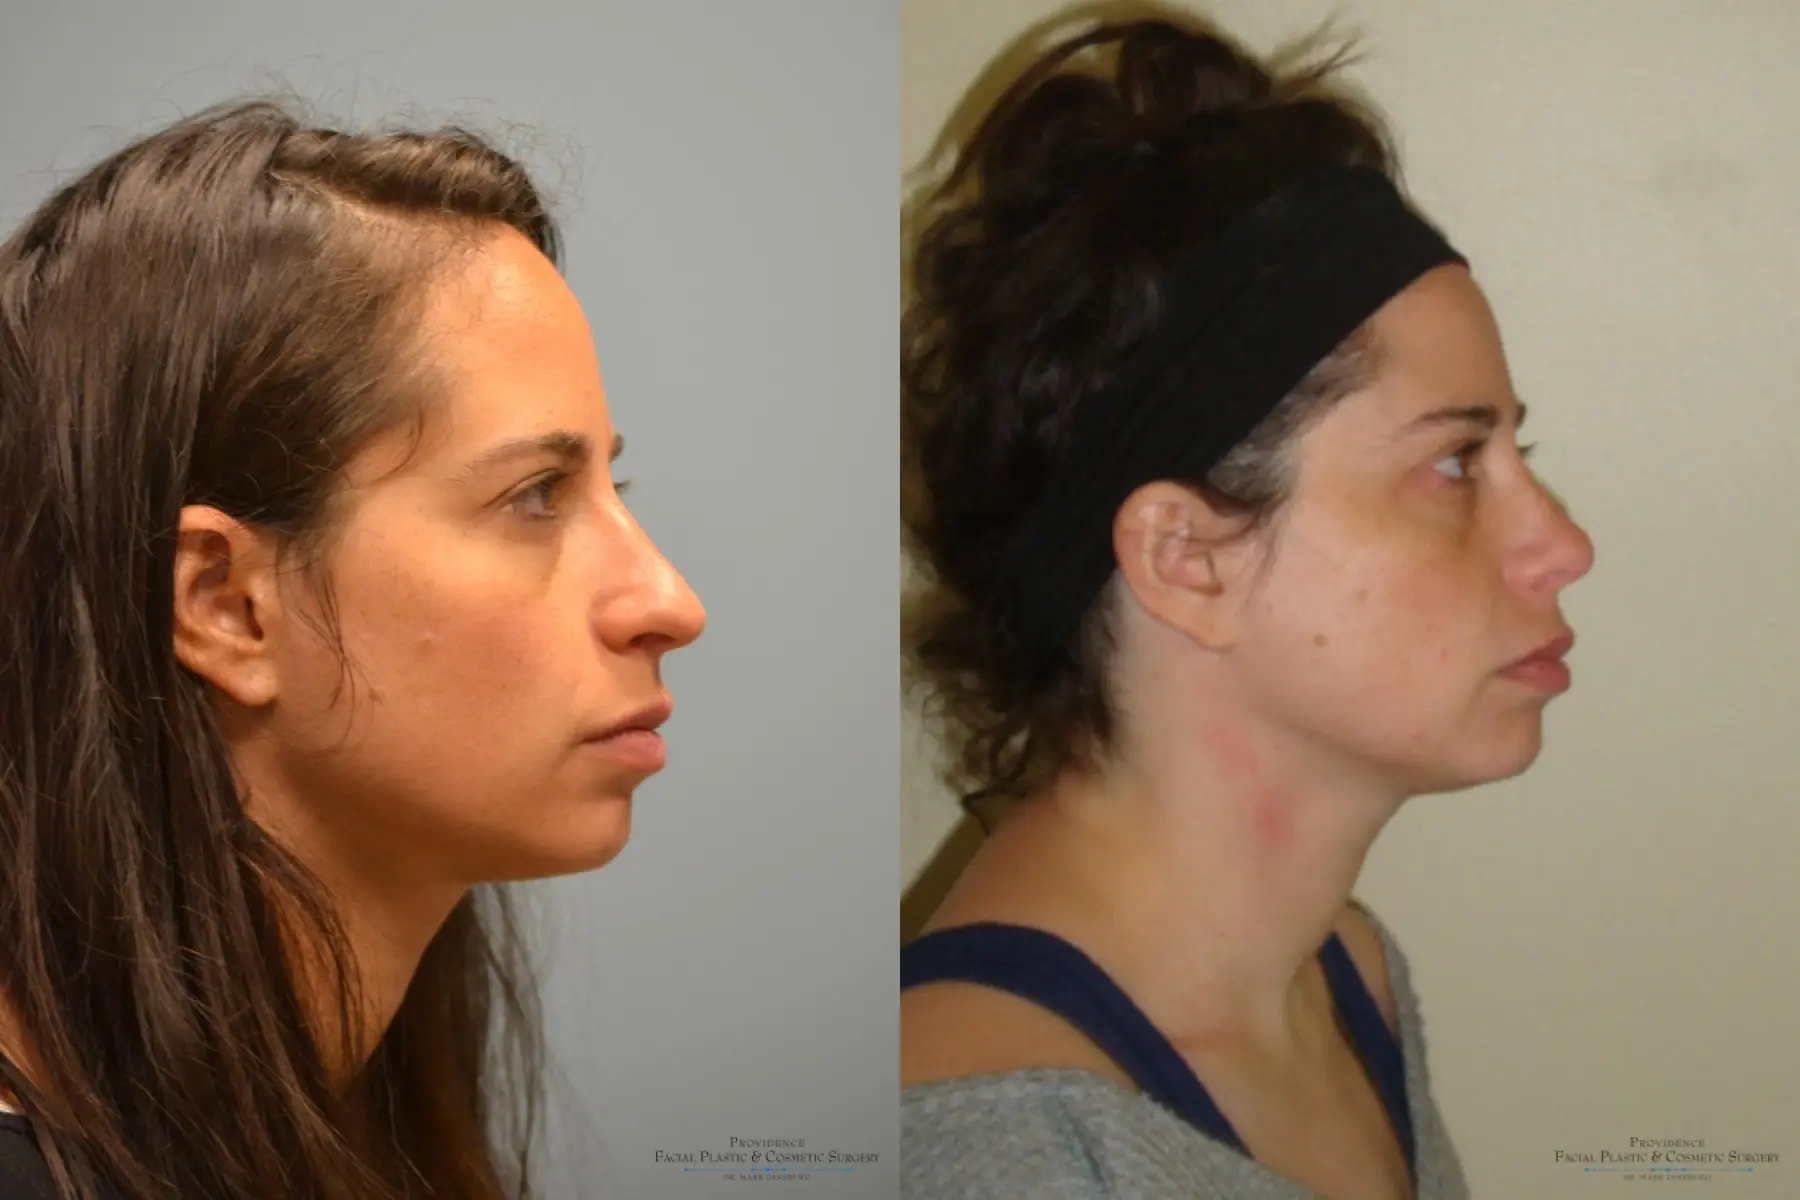 Rhinoplasty: Patient 3 - Before and After 3